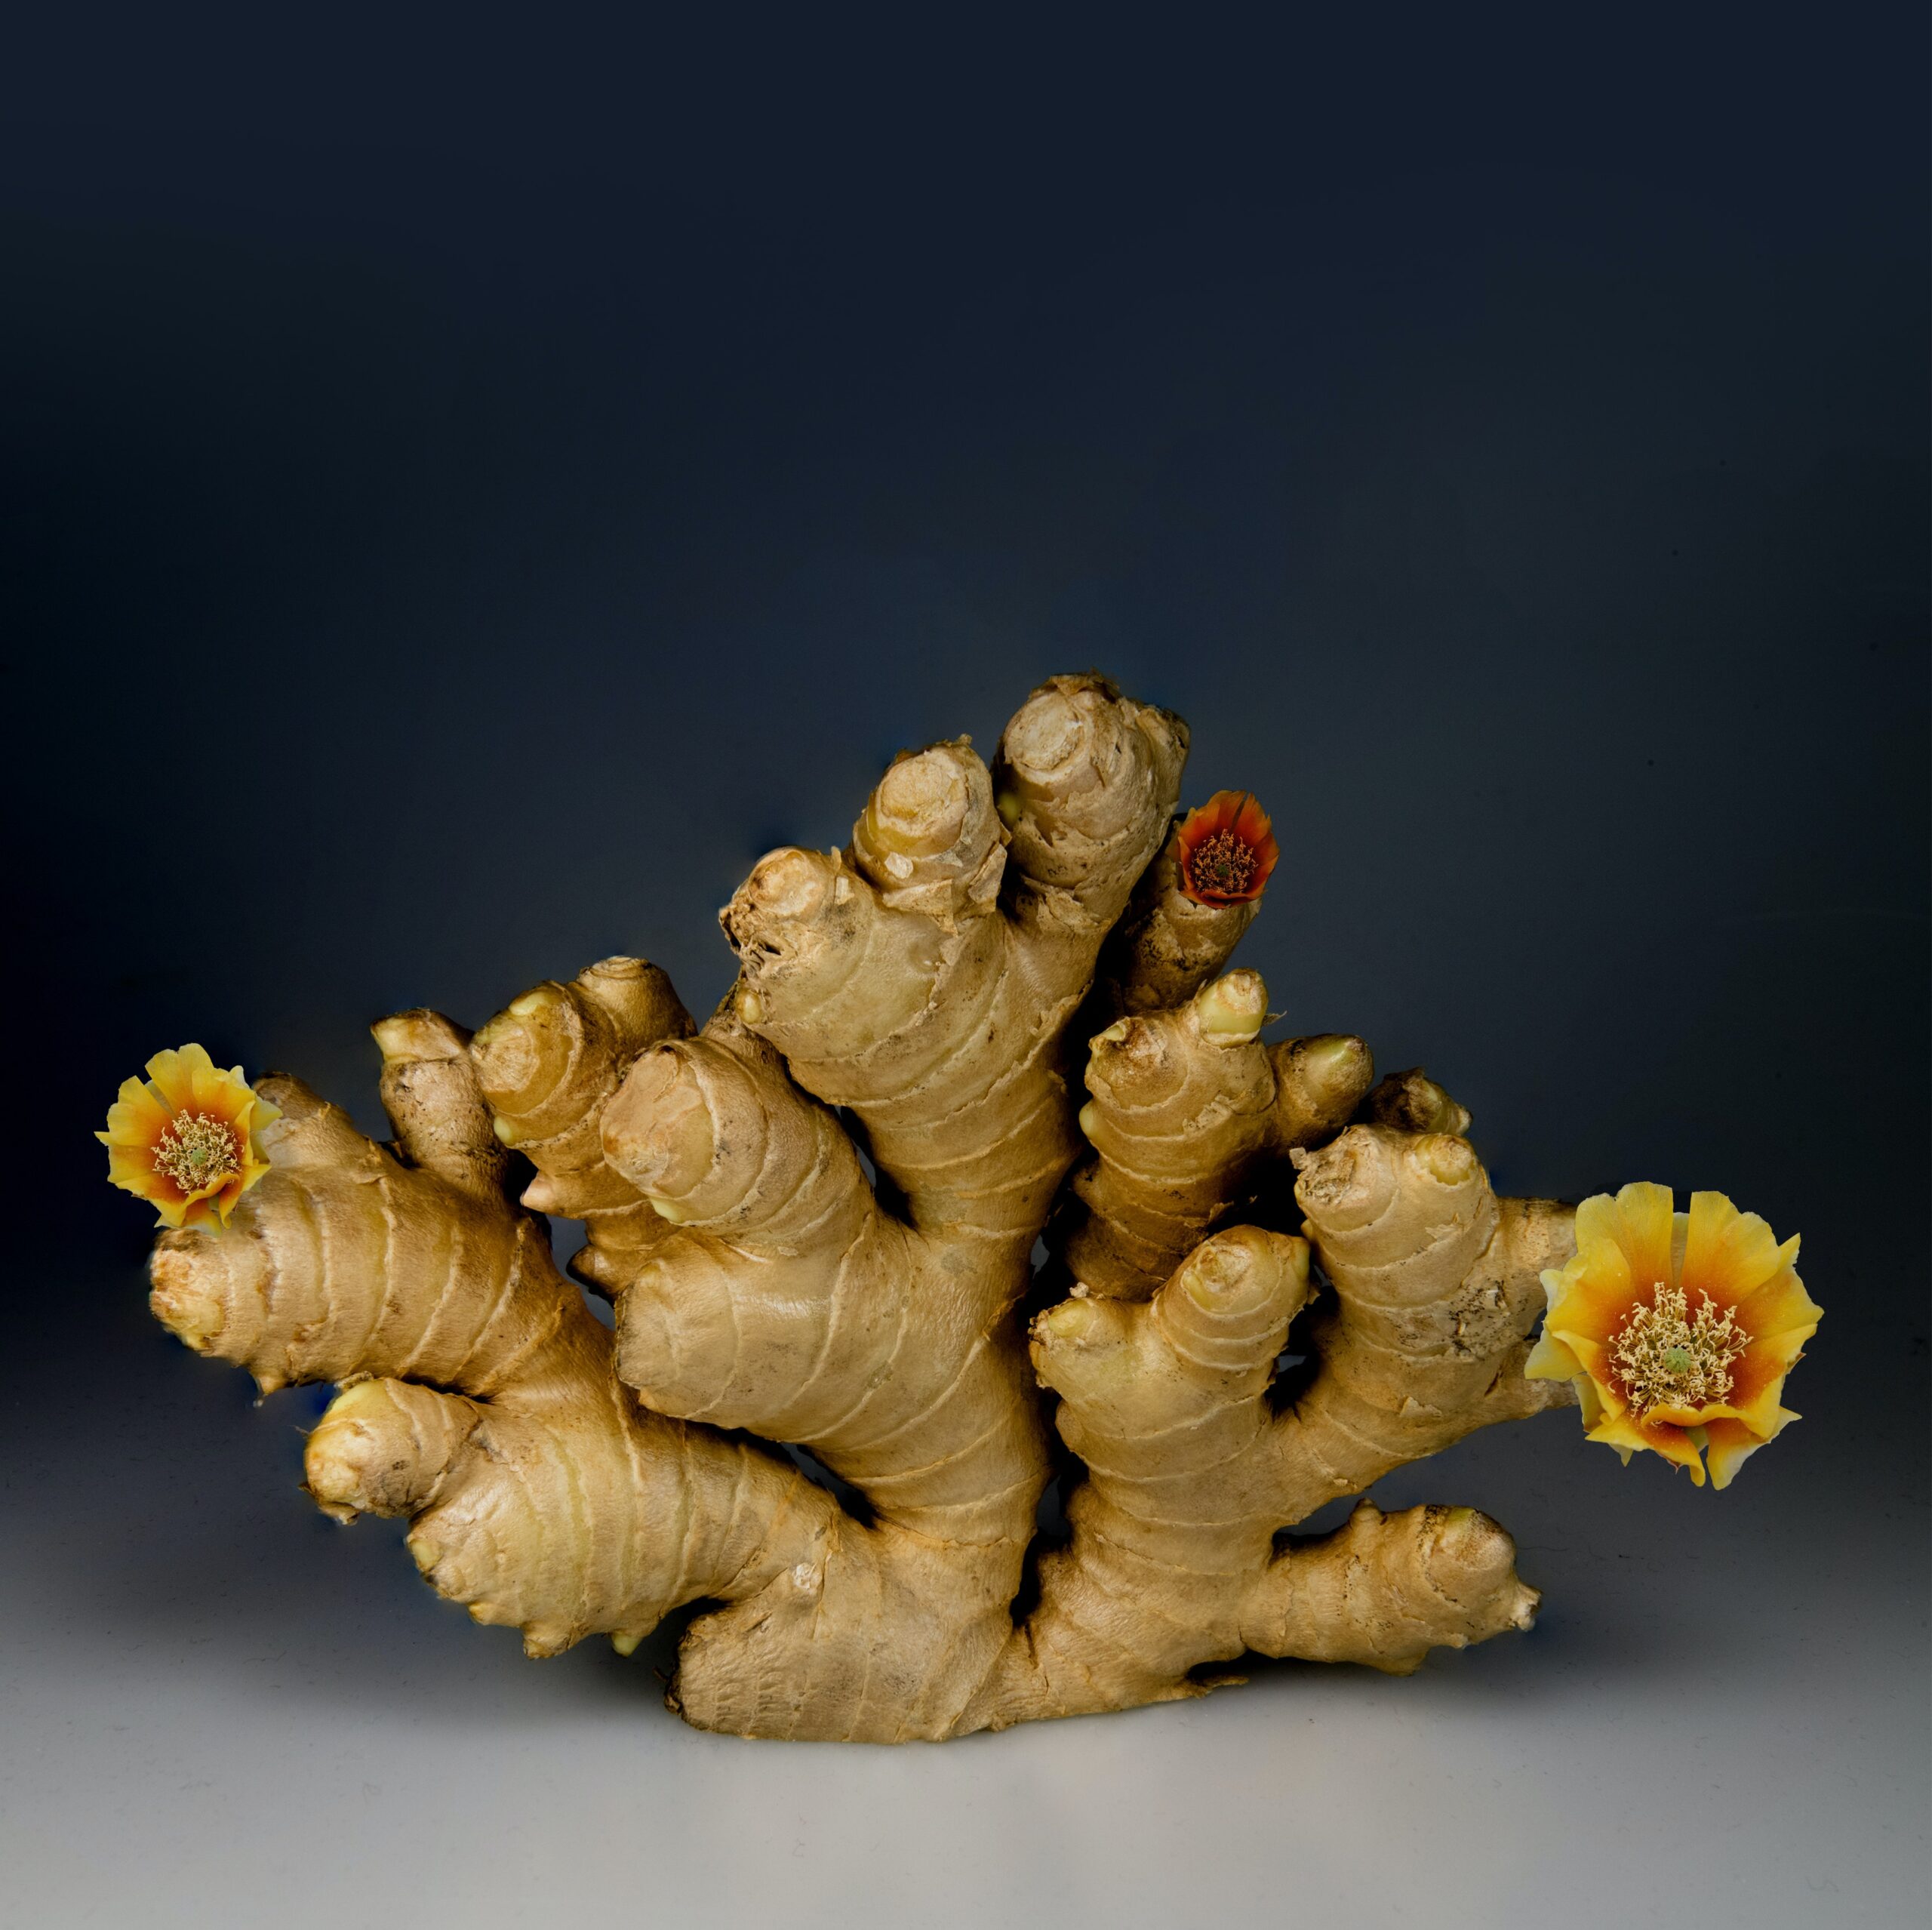 Ginger root health